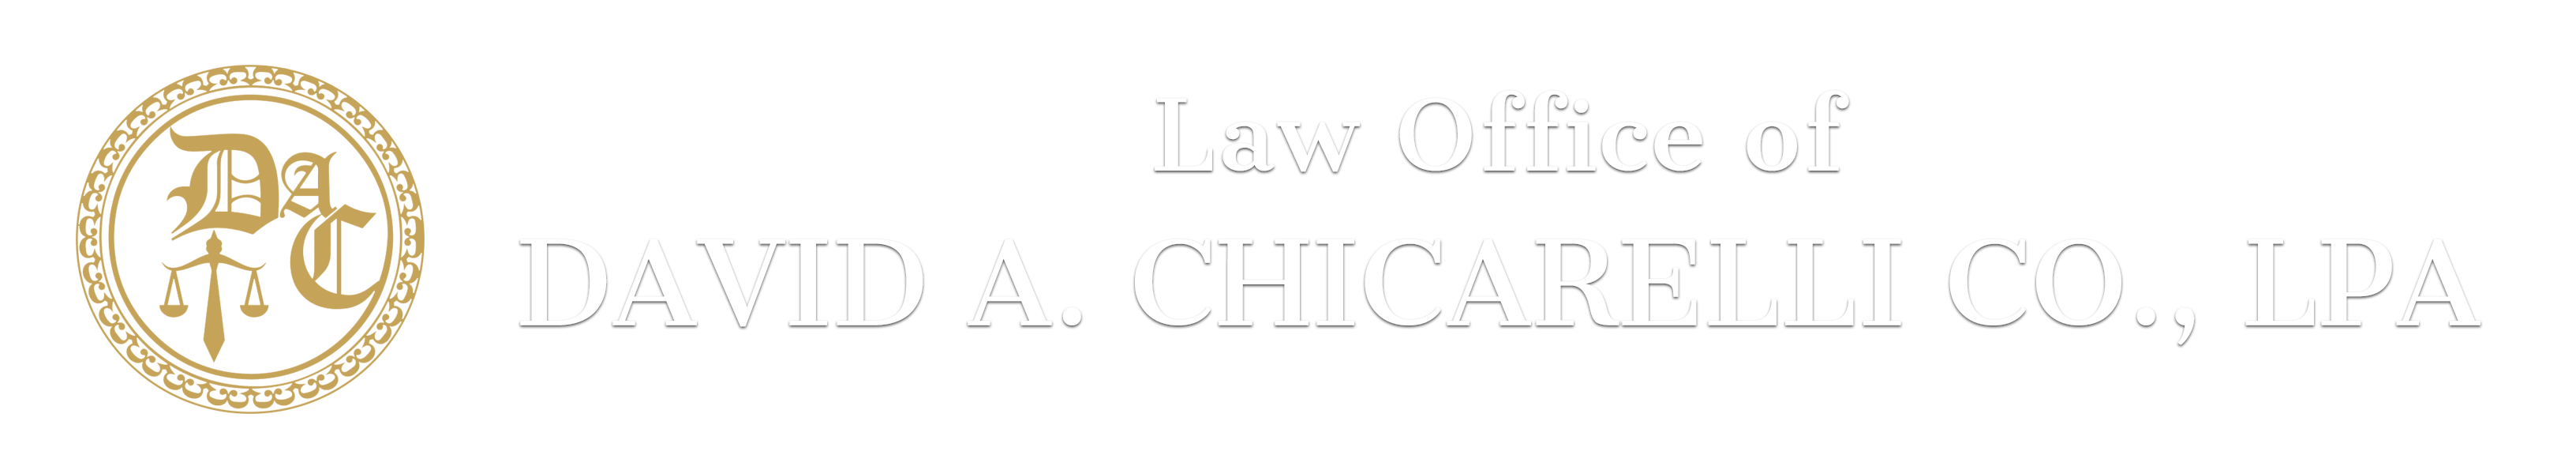 Law Office of David A. Chicarelli Co., LPA